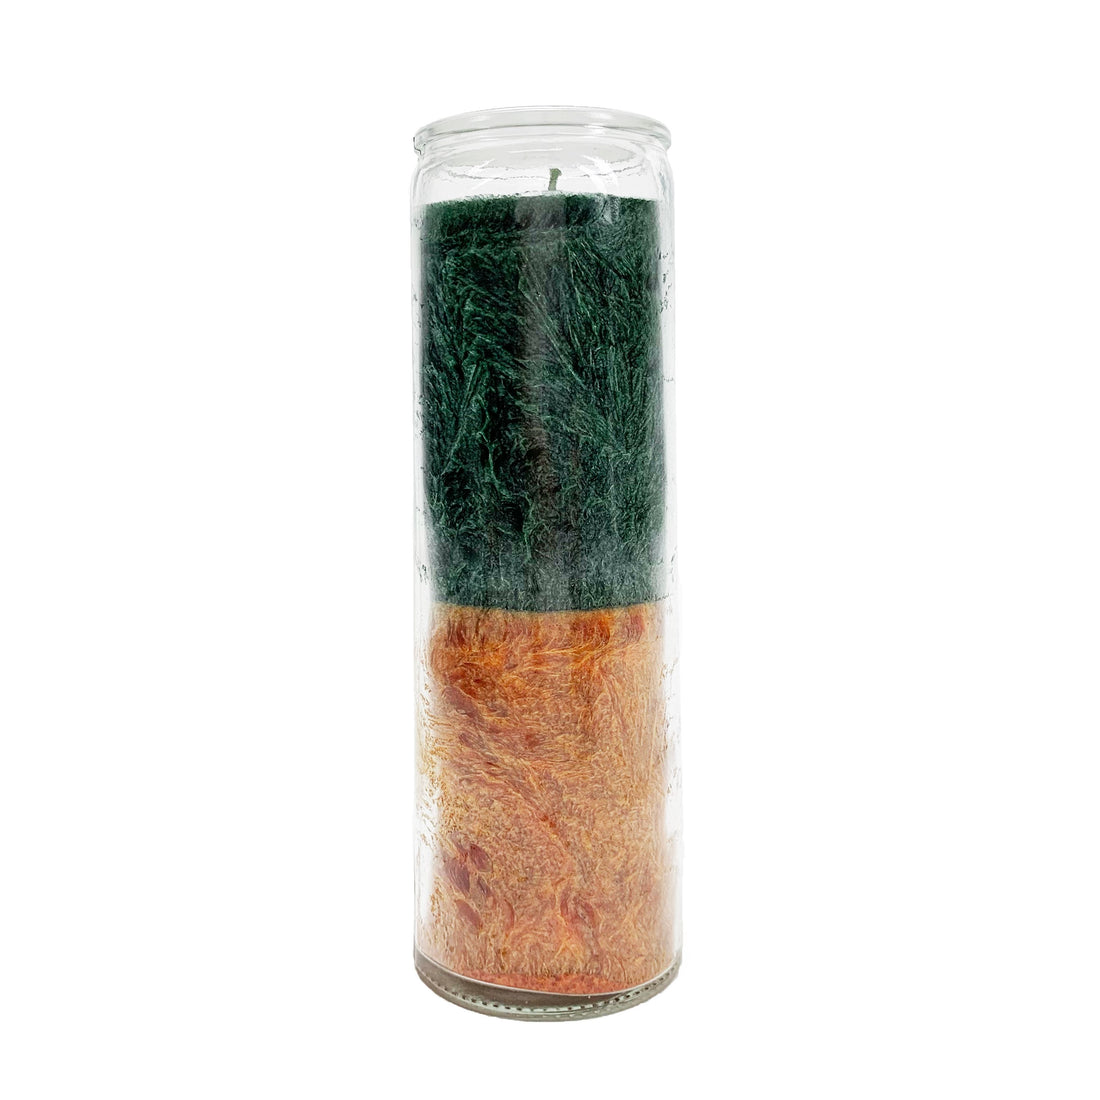 Green and Orange Palm Wax Prayer Candle Prayer Candles House of Intuition 